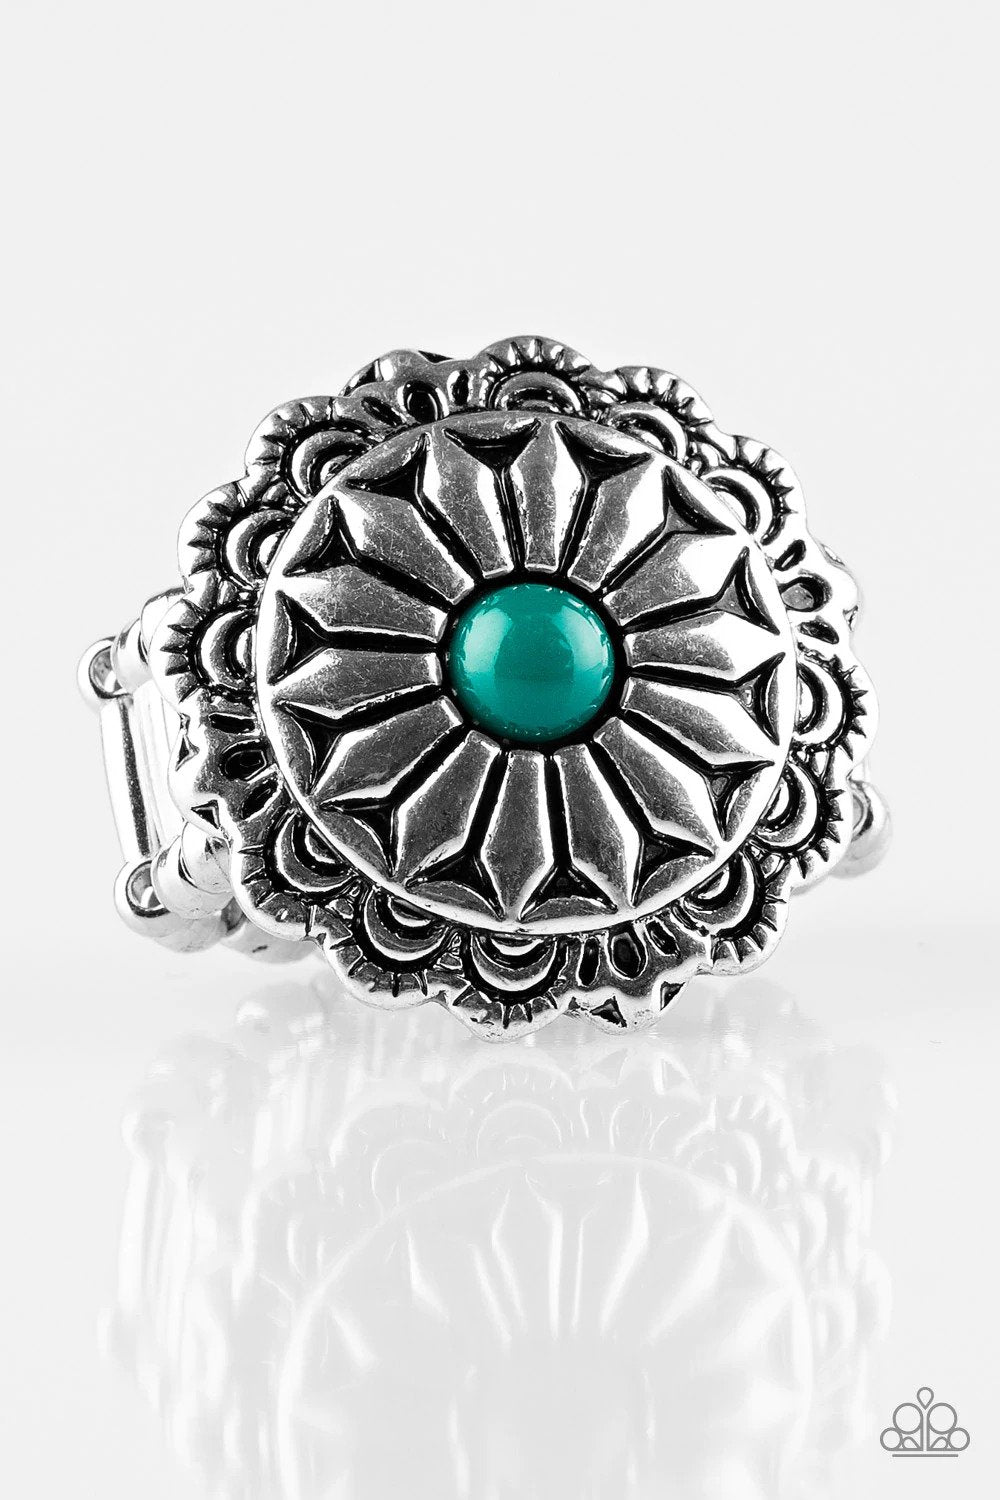 Daringly Daisy Green Ring - Paparazzi Accessories- lightbox - CarasShop.com - $5 Jewelry by Cara Jewels